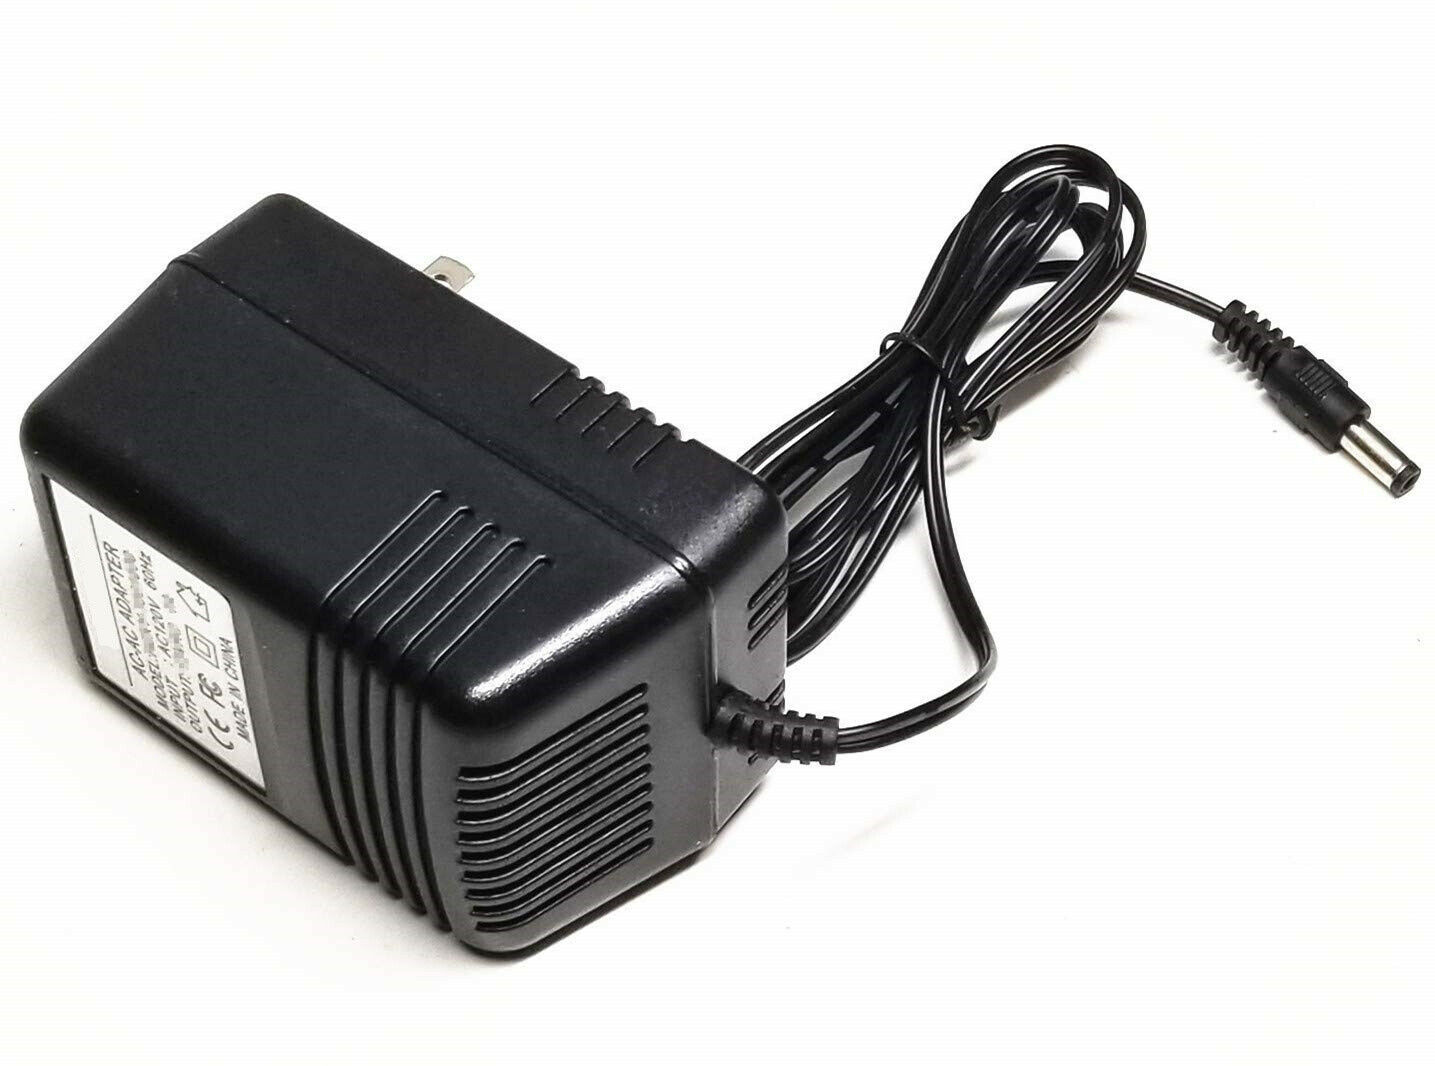 AC/DC Adapter Wall Charger Power Supply Cord For Canon Elura 100 85 Camcorder Brand New, High Quality AC Power Adapter - Click Image to Close